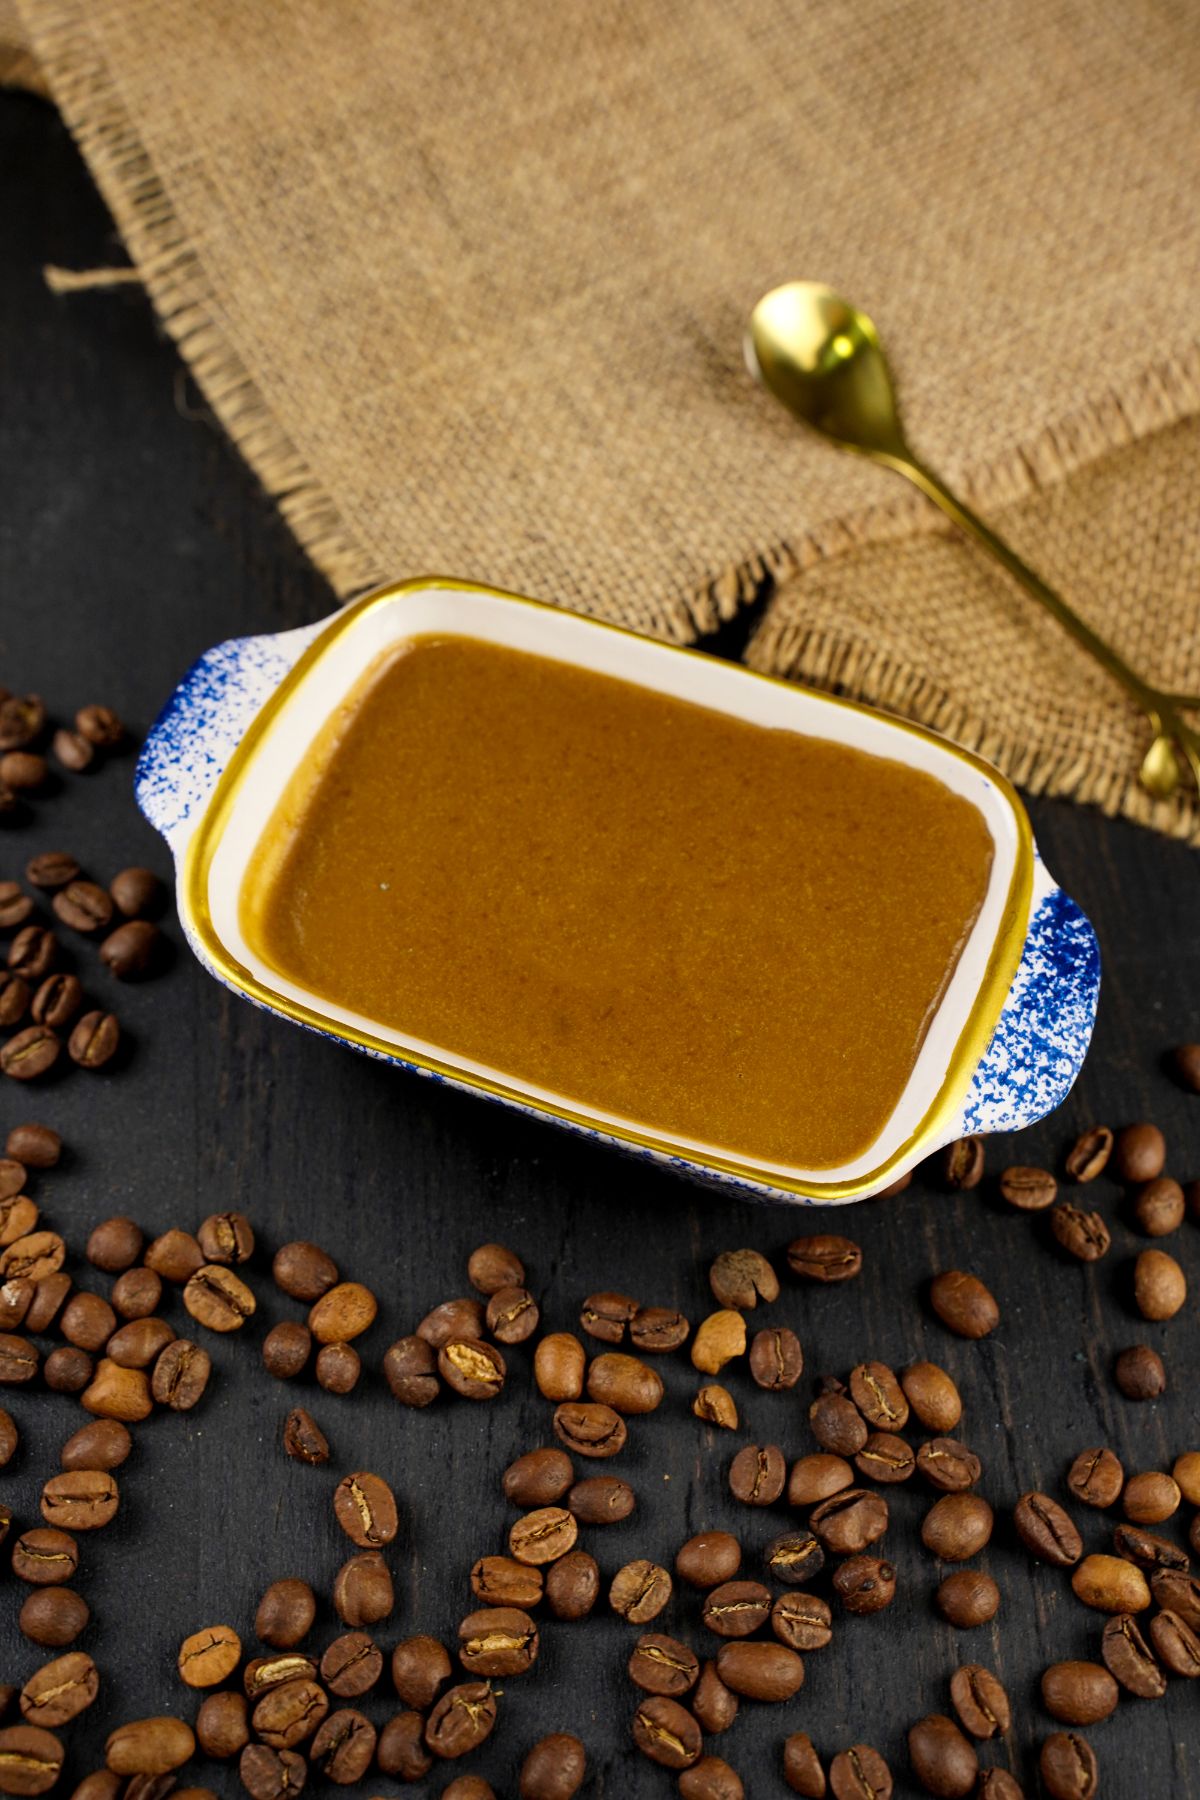 No Bake Espresso Creme Brulee served with a golden spoon